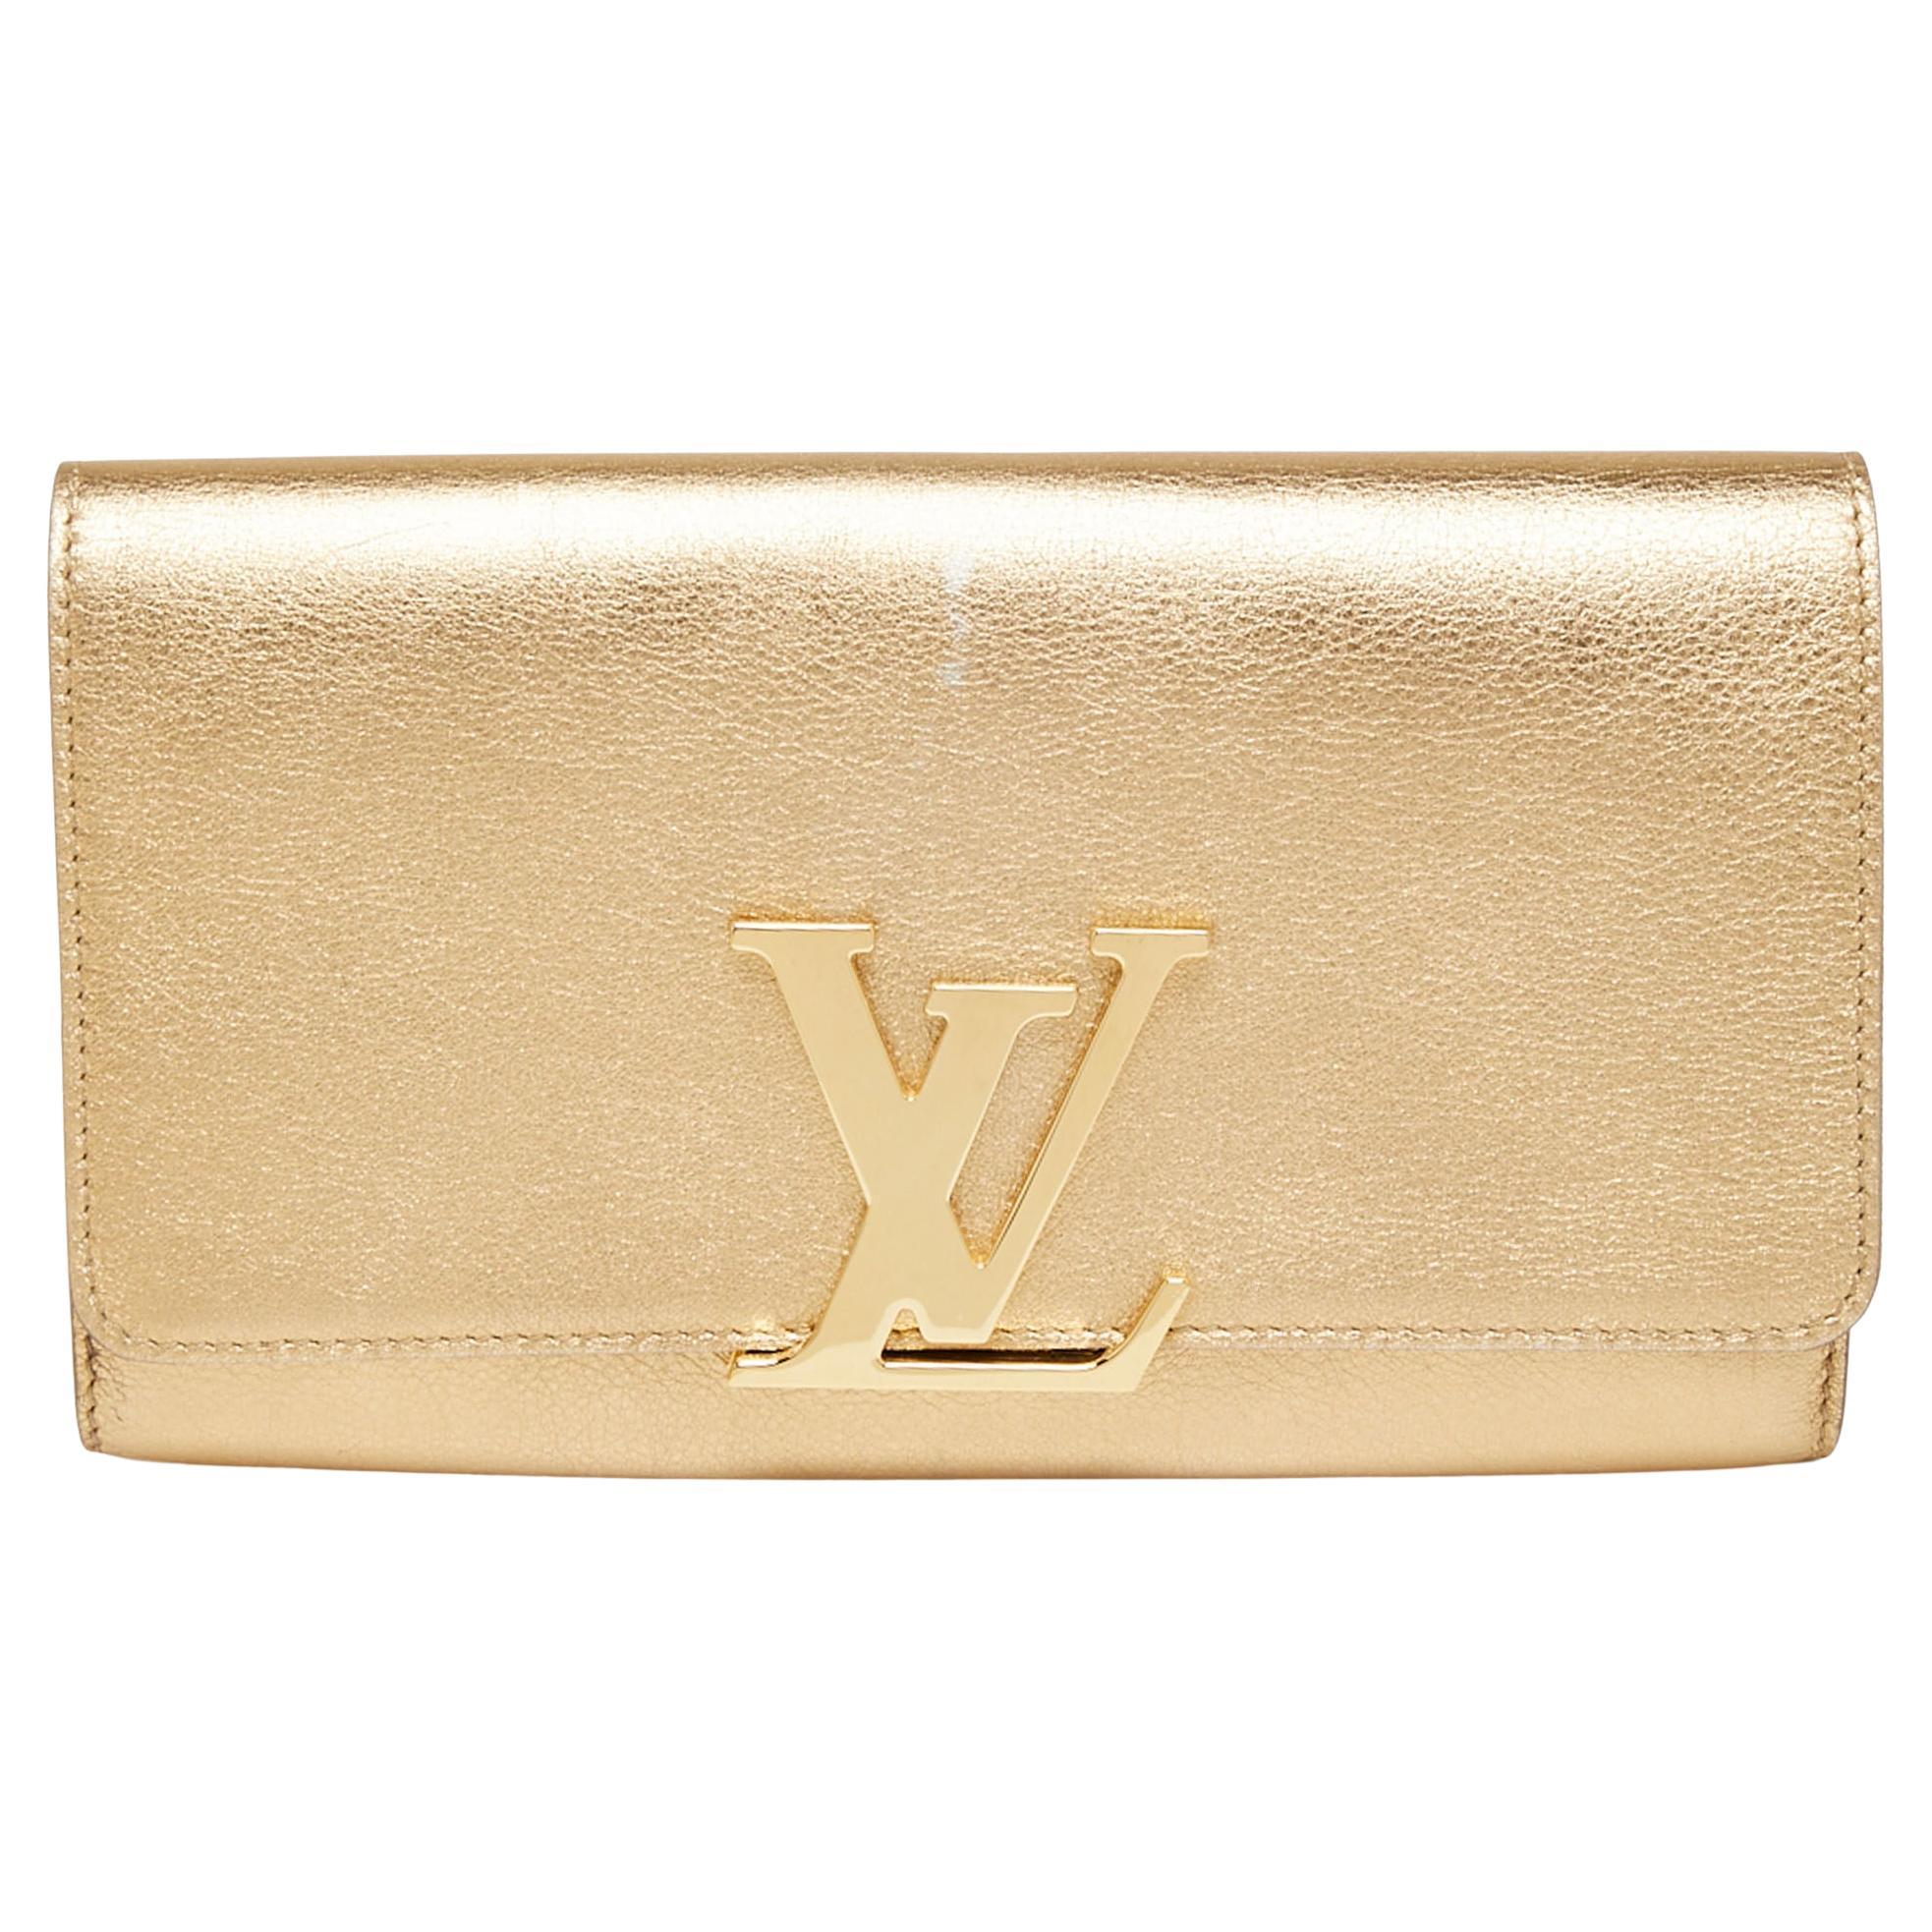 Sold at Auction: LOUIS VUITTON LOUISE PHONE RING